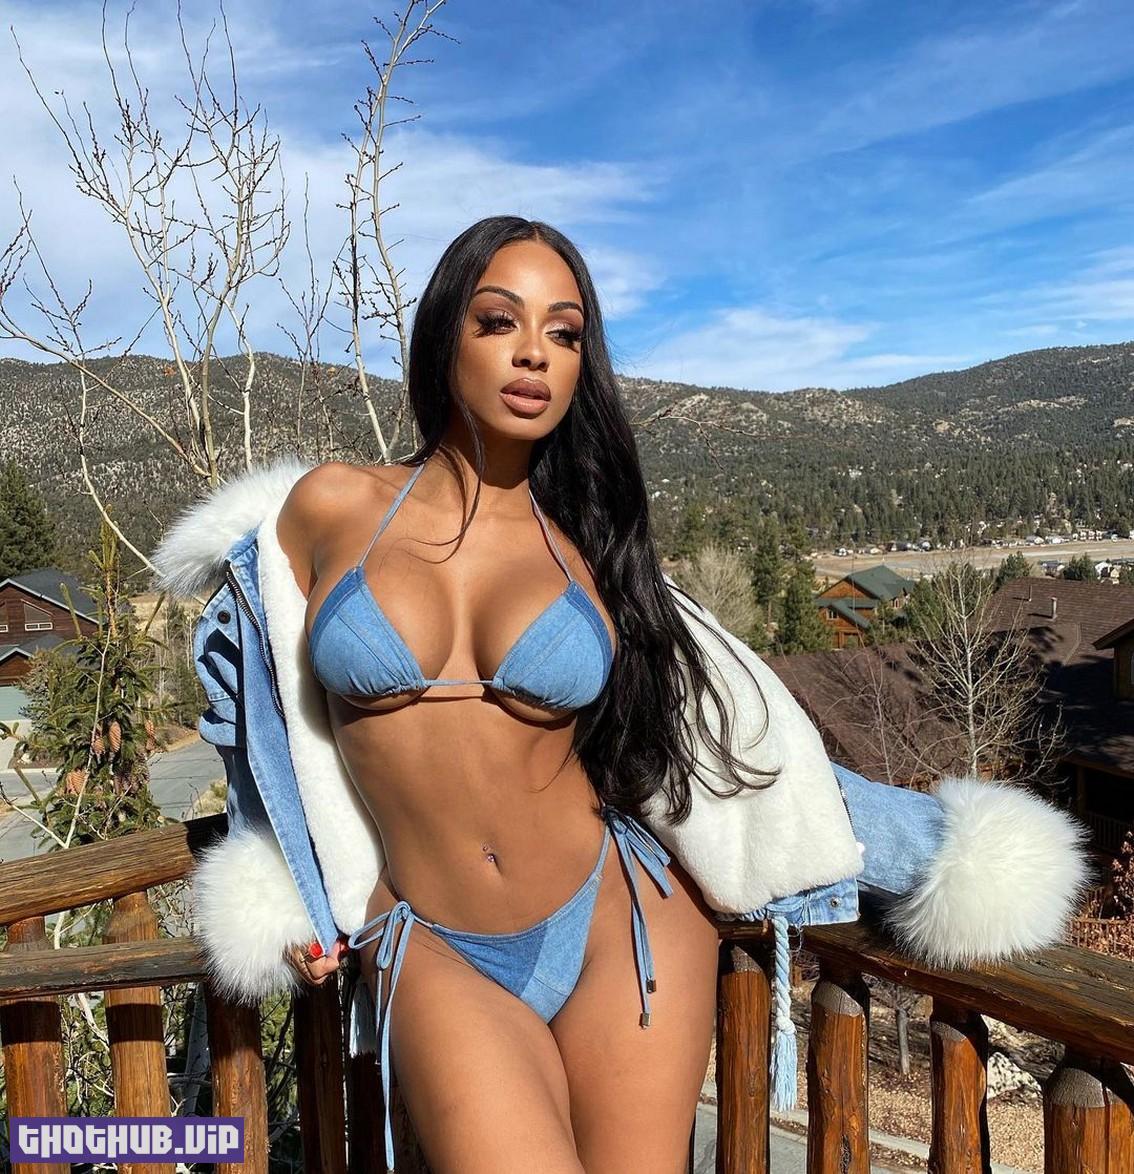 1684643990 18 Analicia Chaves Sexy 26 Photos And Videos